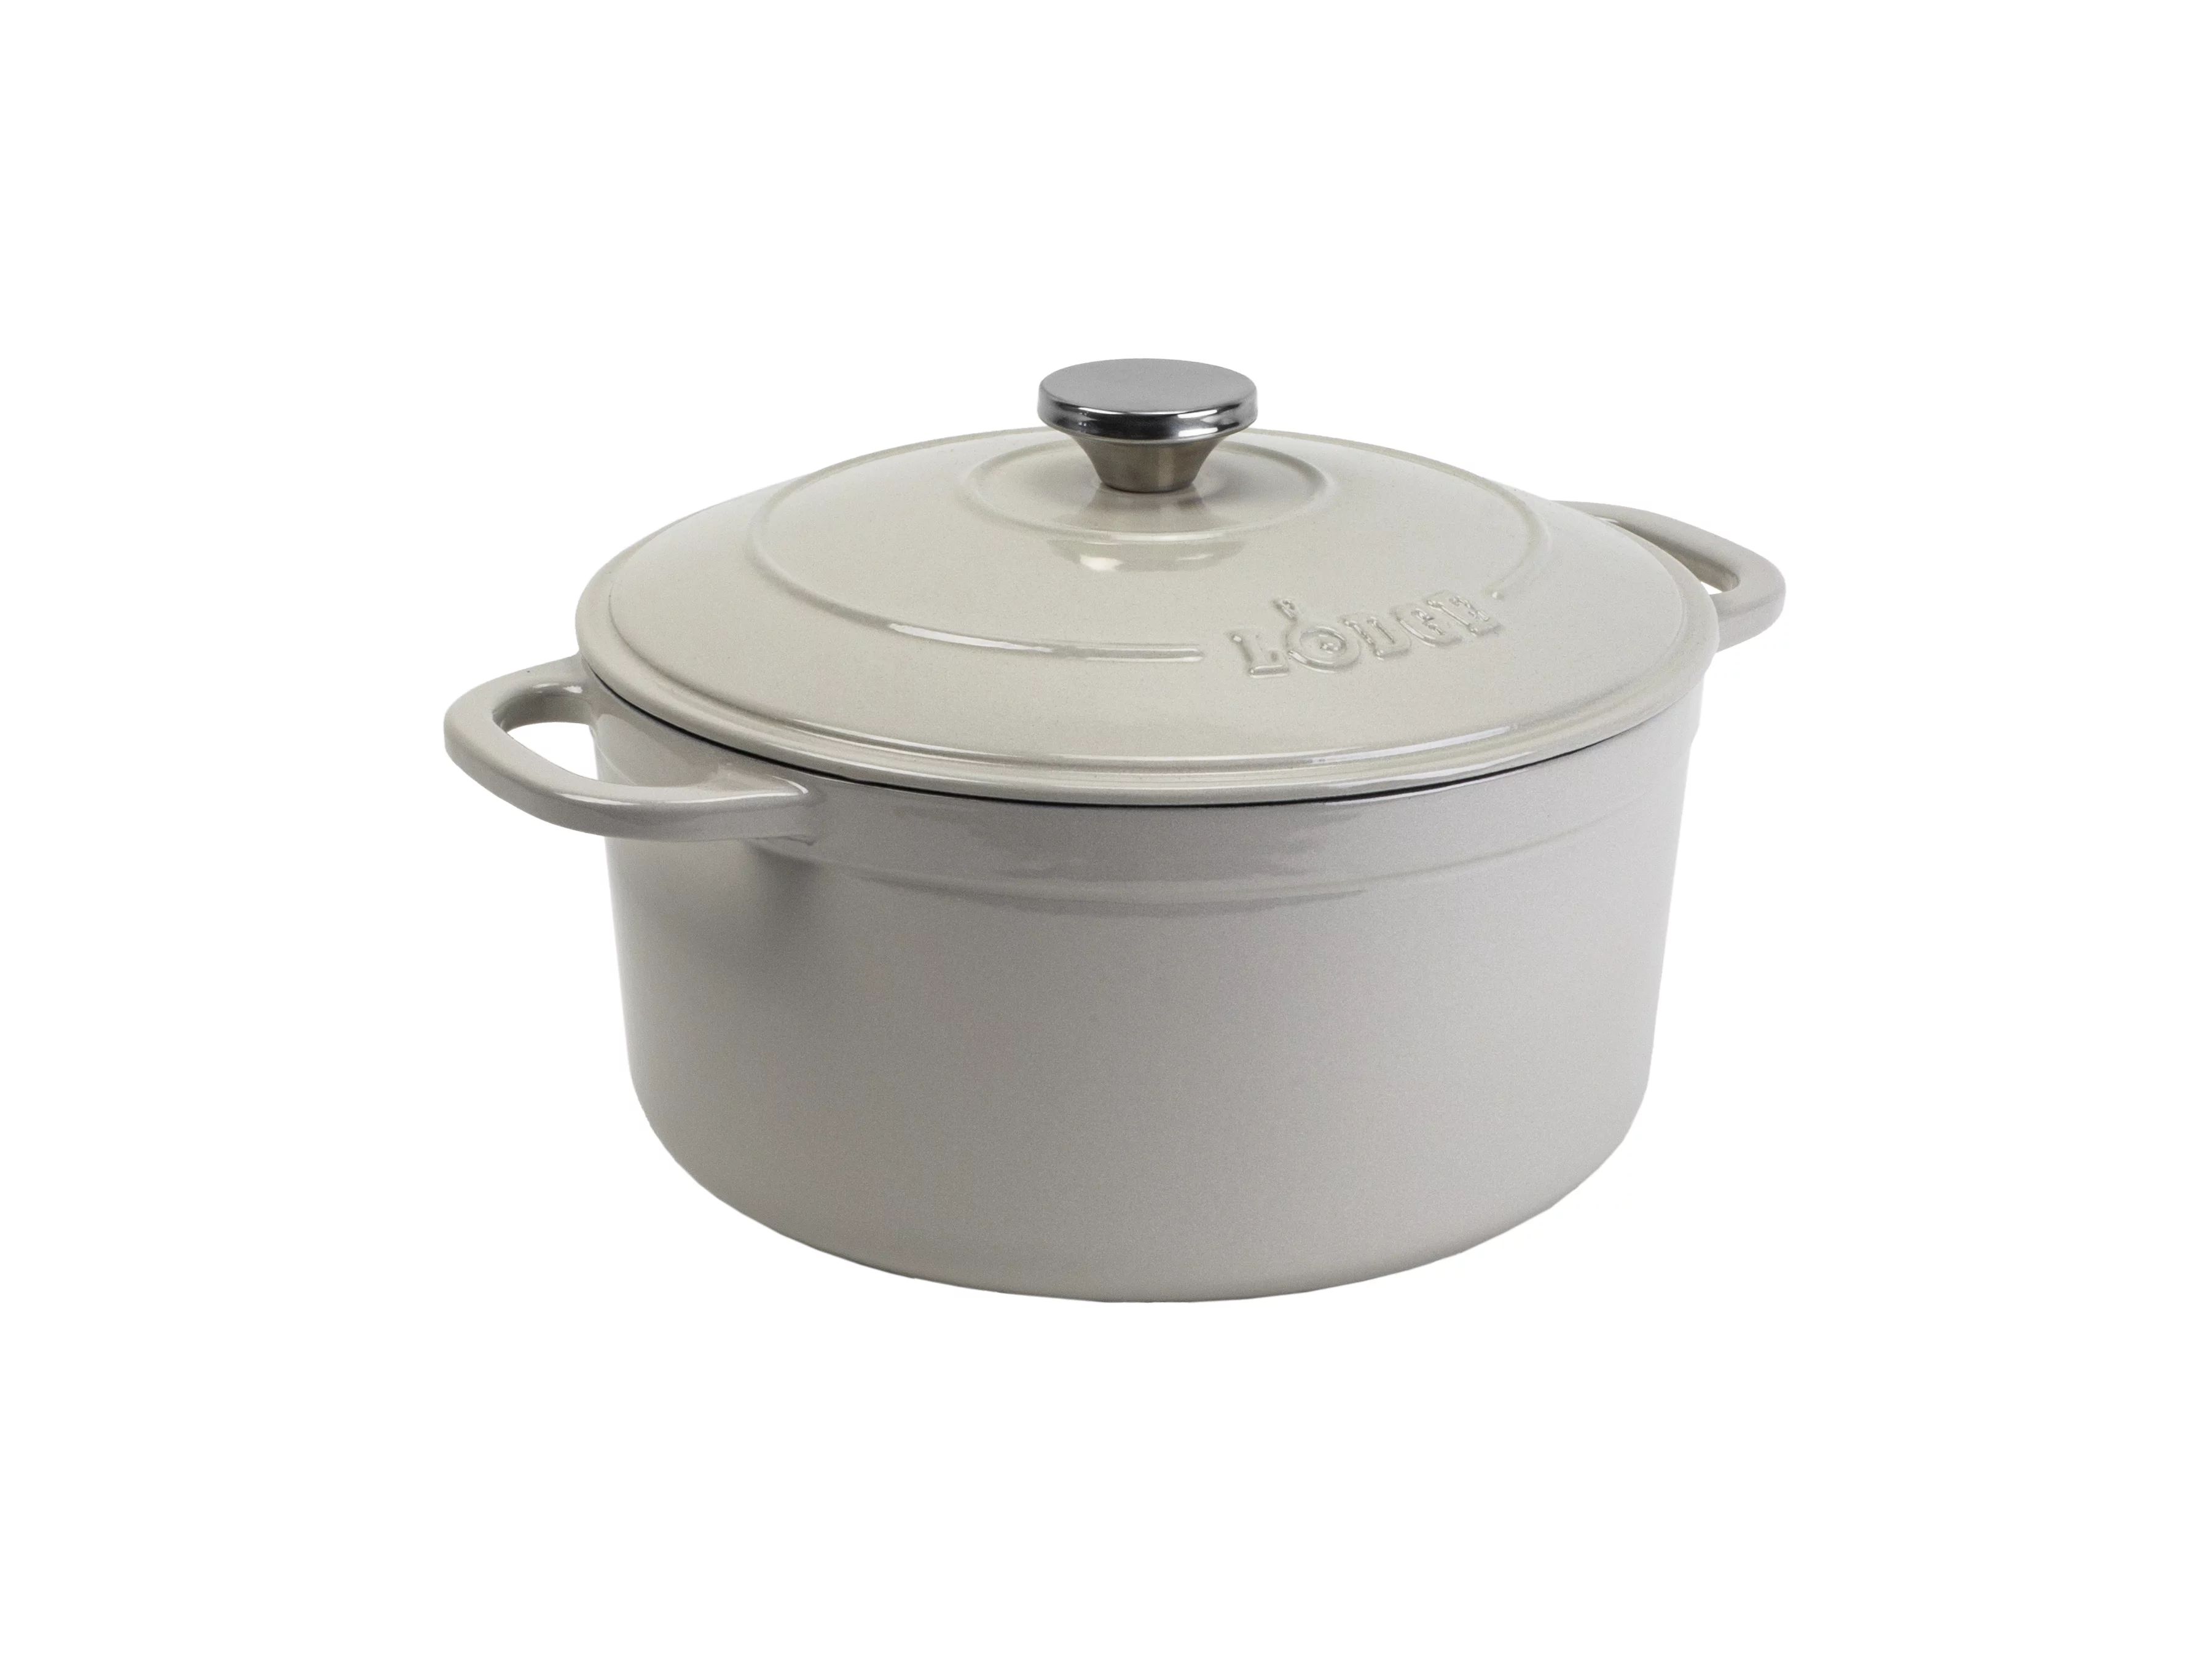 Lodge Enameled Cast Iron 4.0 Quart Dutch Oven, in Oyster White | Walmart (US)